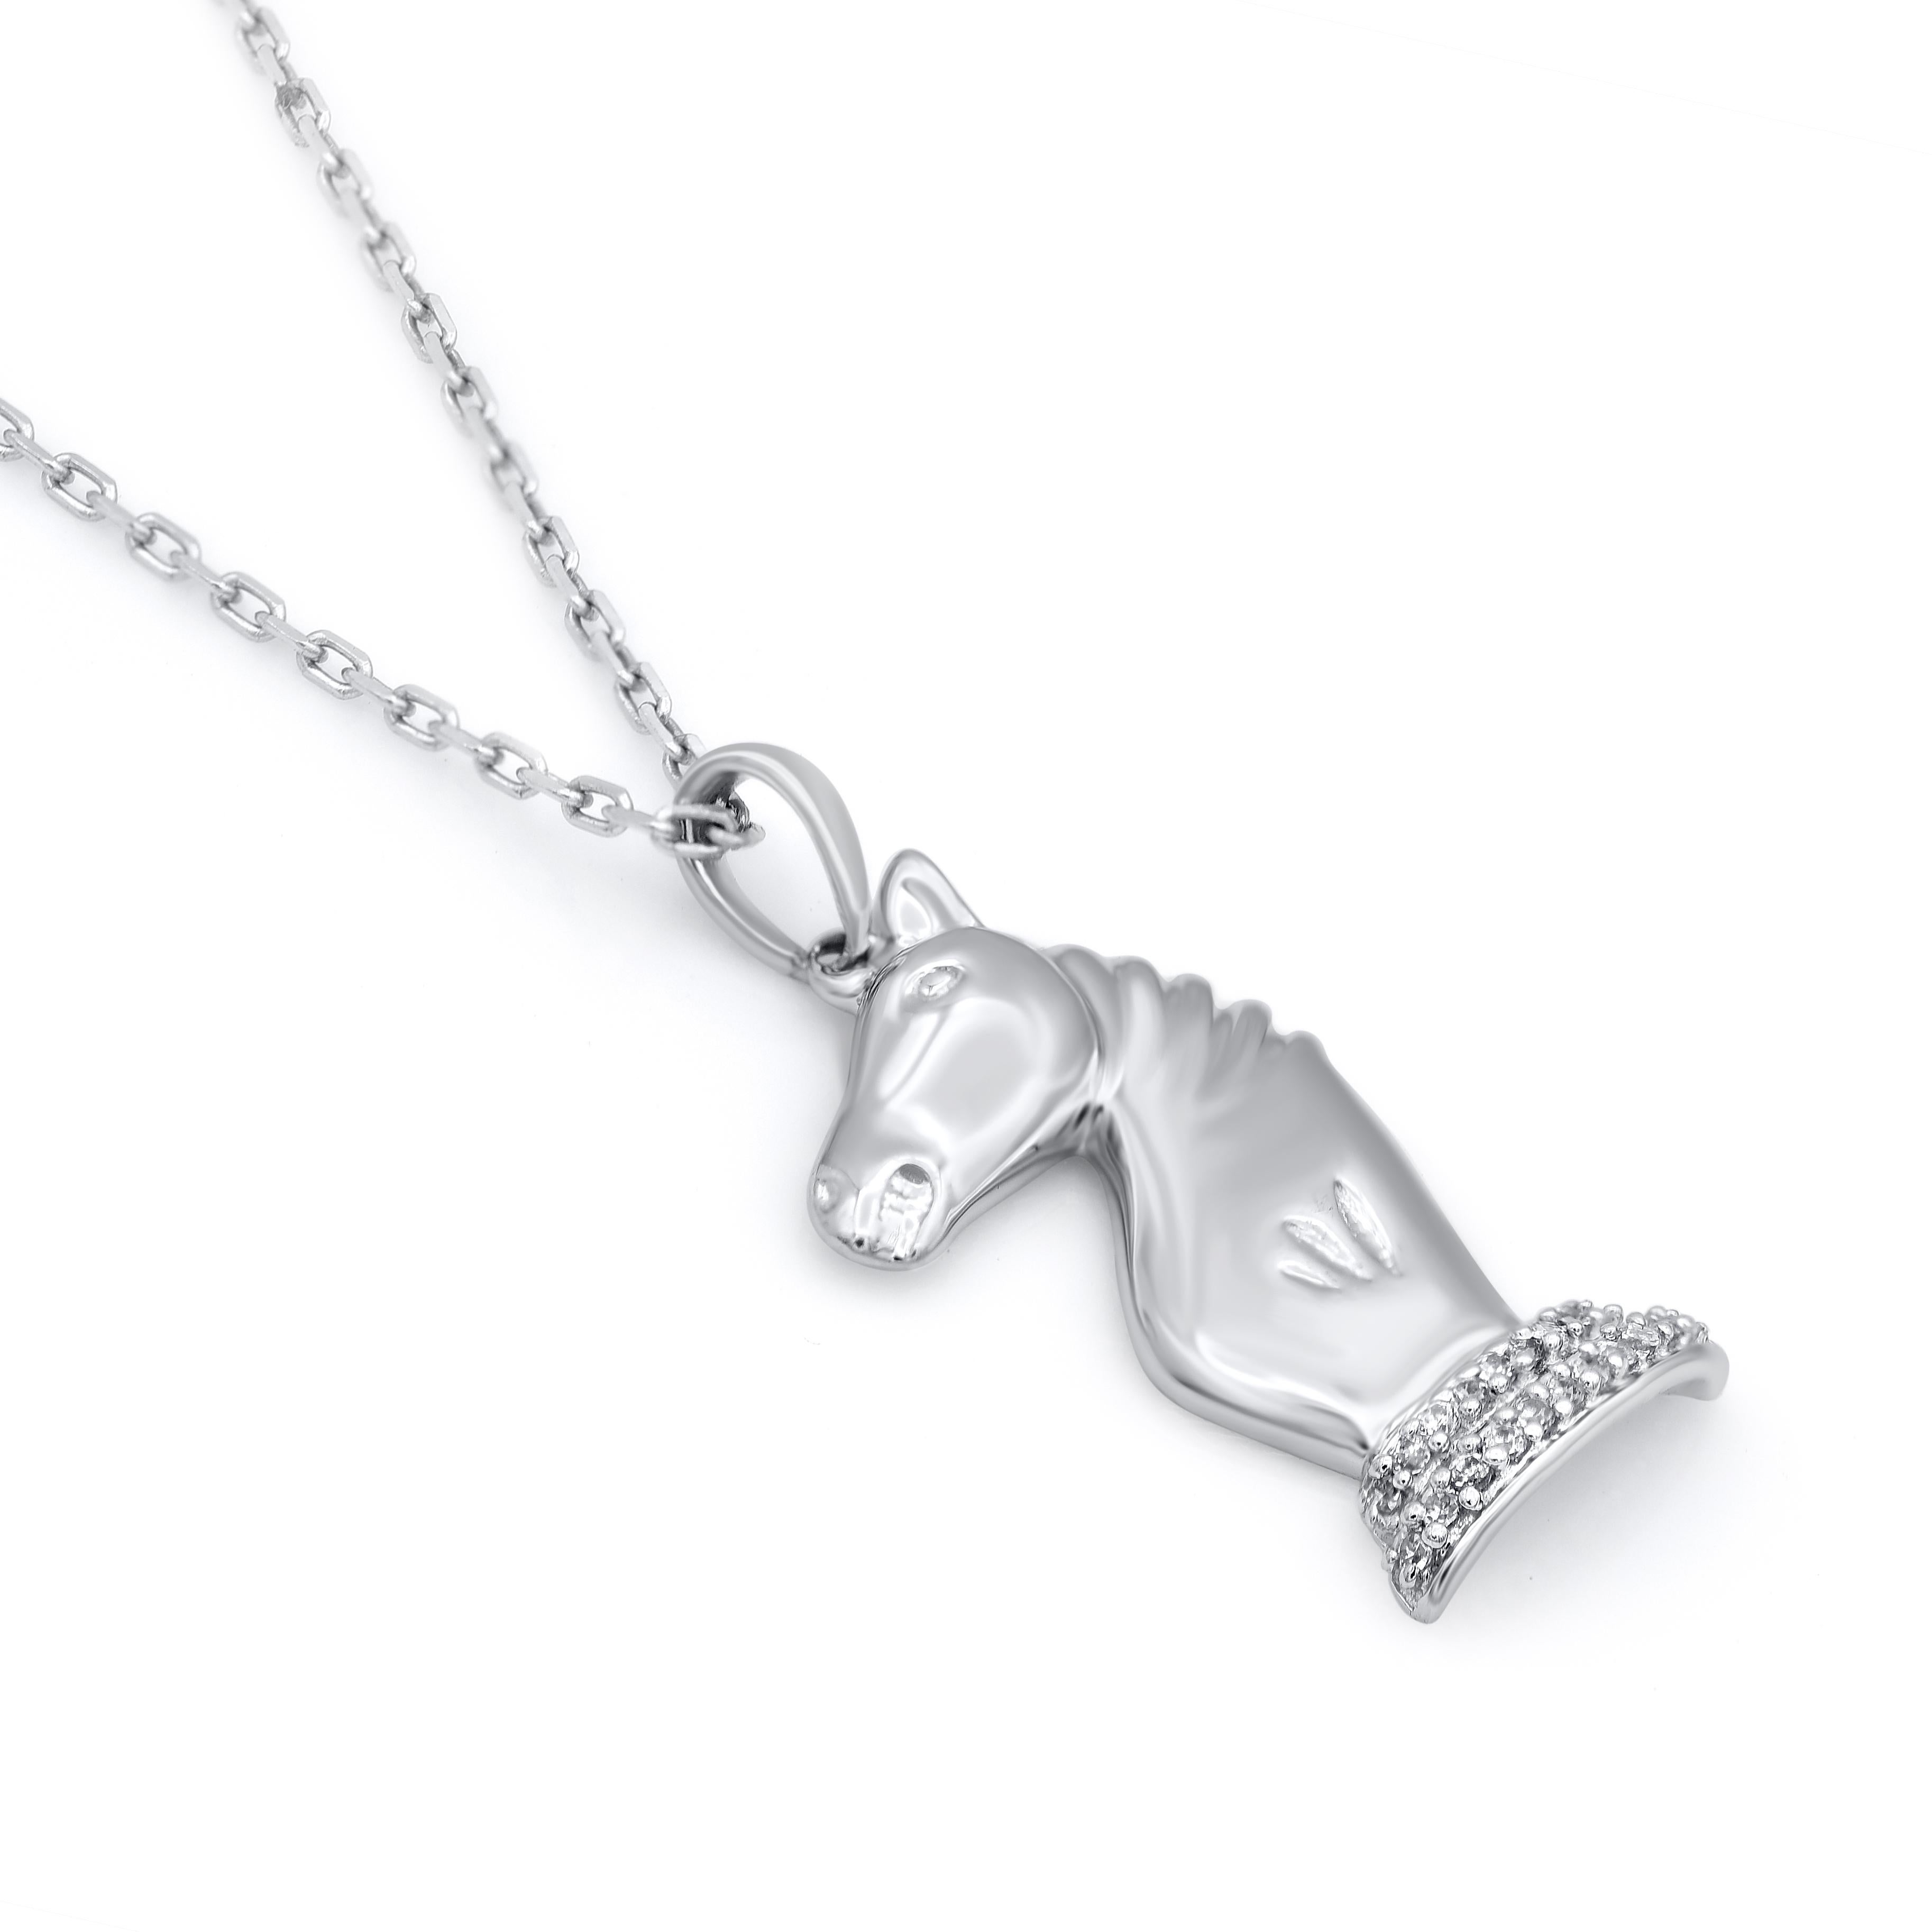 A striking addition when worn on its own, this diamond pendant makes a stunning impression. This knight pendant is crafted from 14-karat white gold and features 22 single cut diamonds set in pave setting. H-I color I2 clarity and a high polish